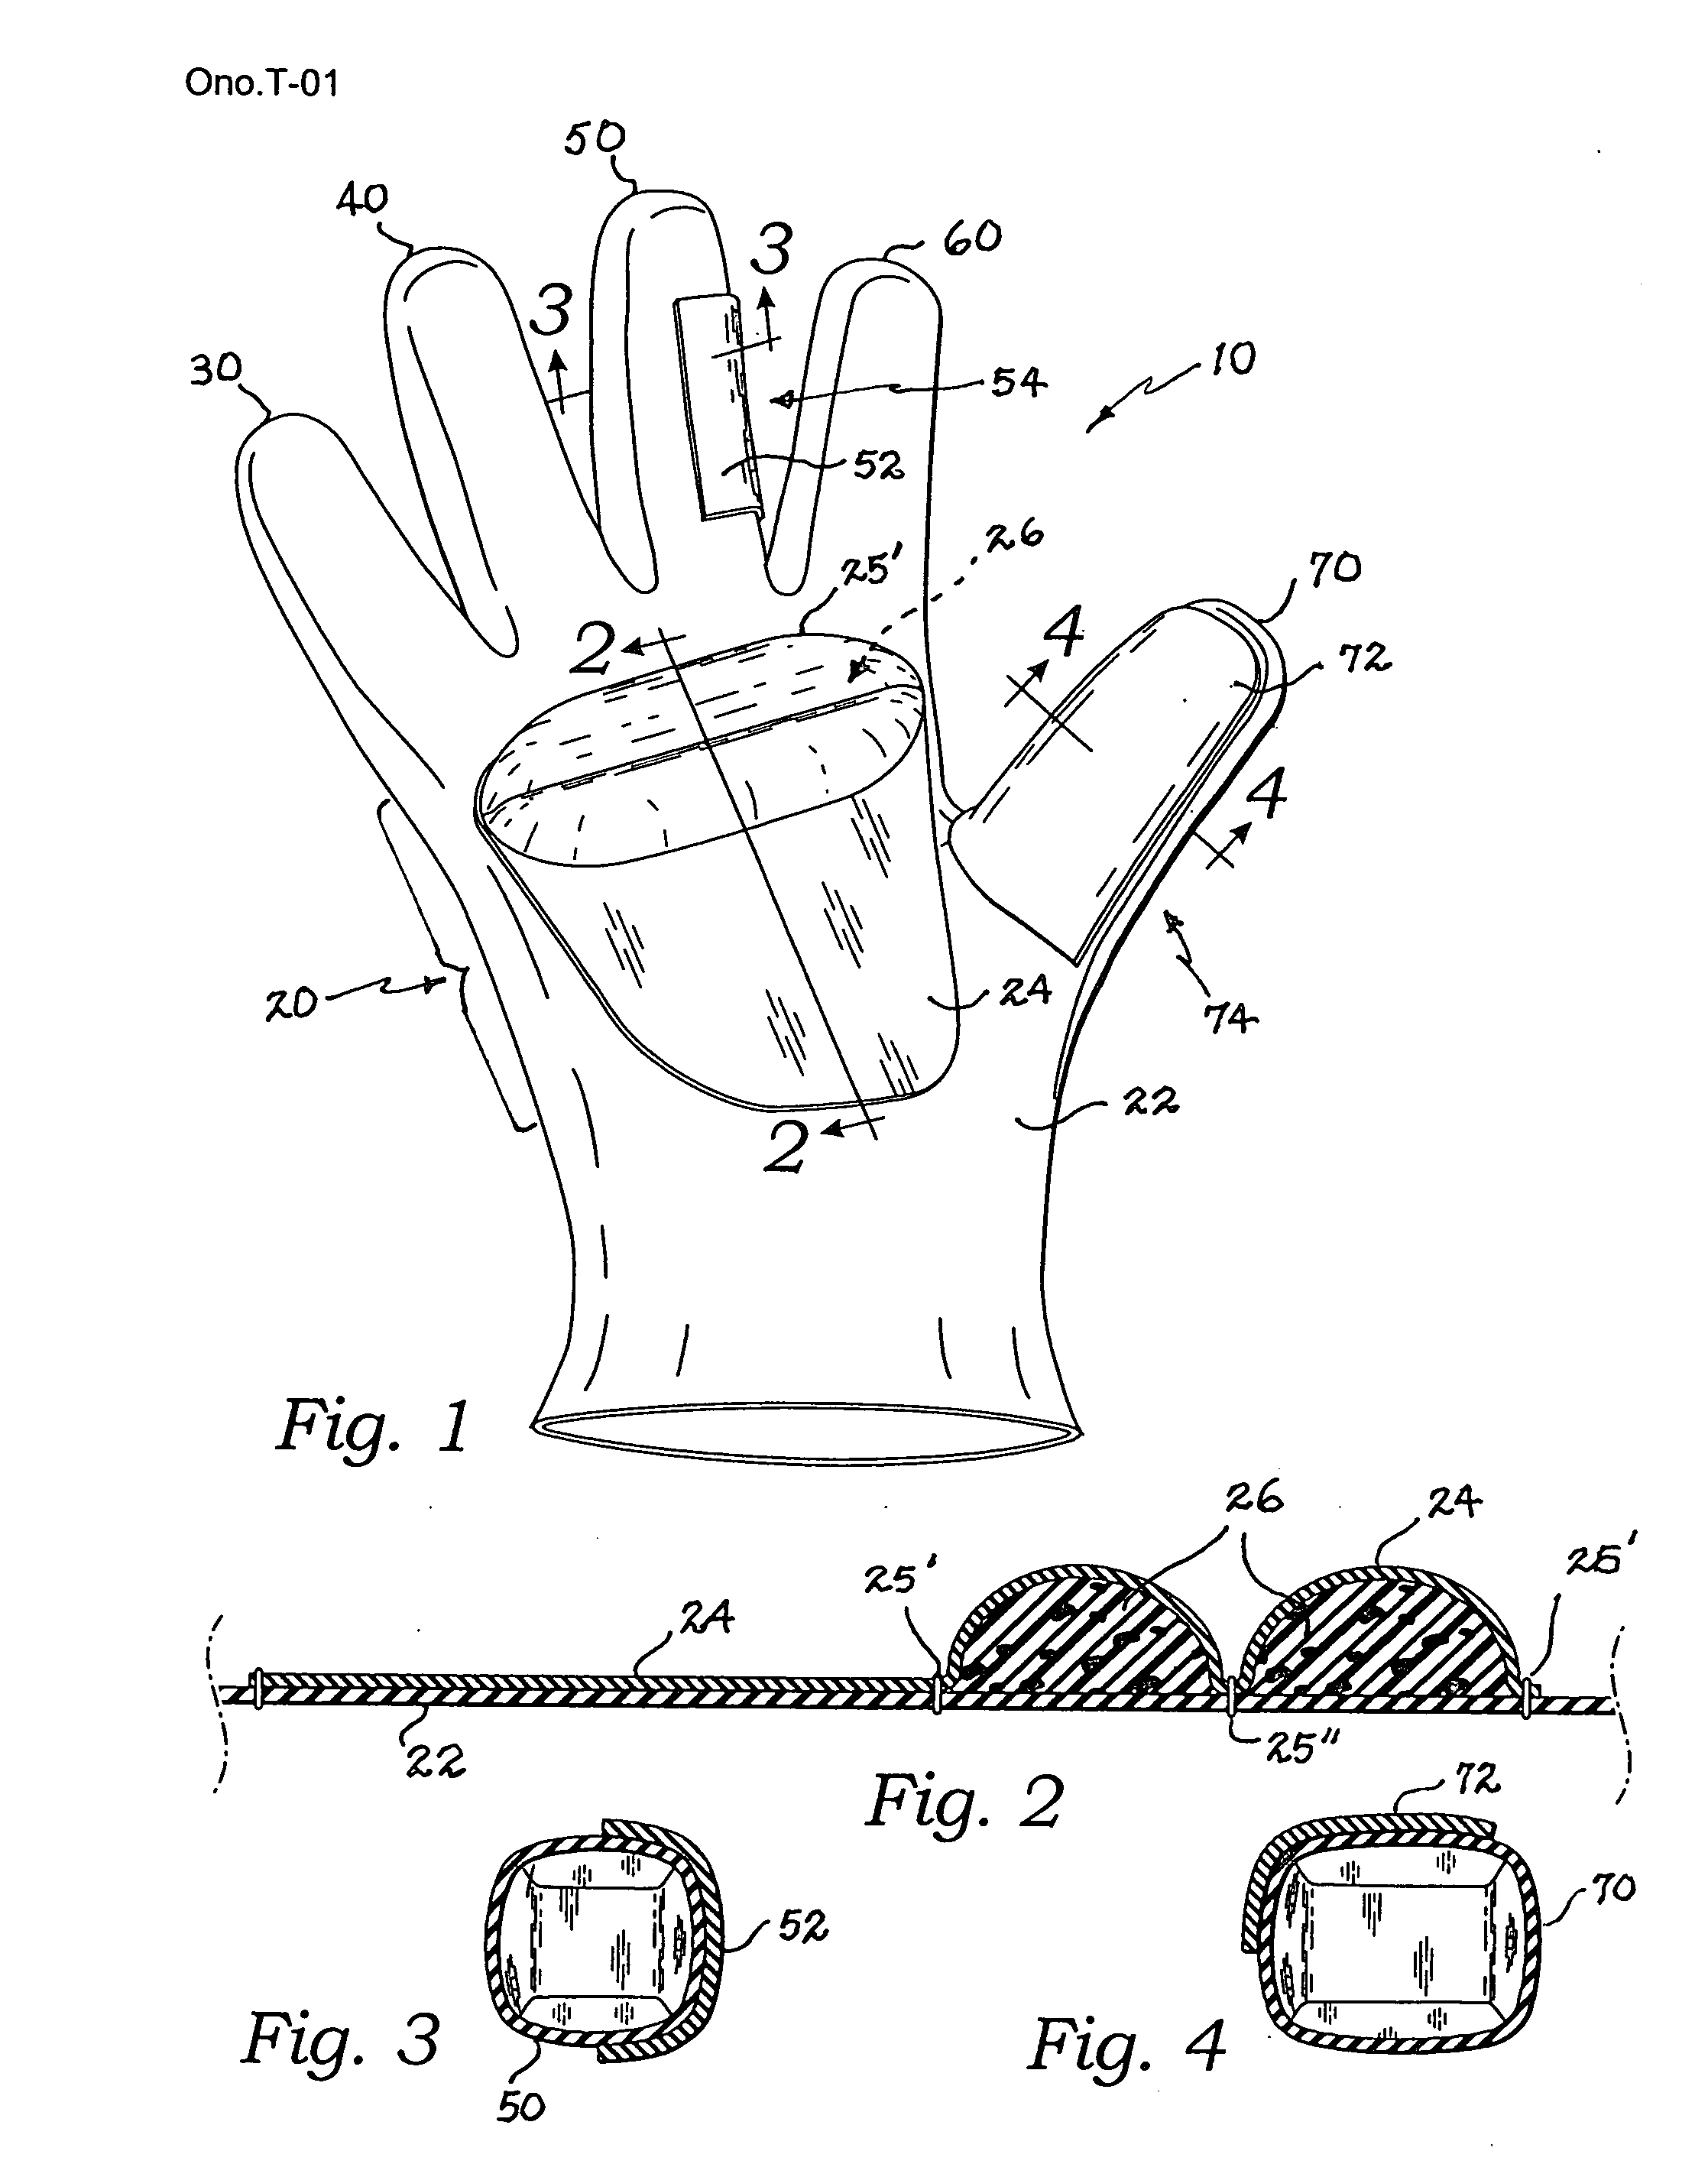 Glove adapted for use in firearms loading, shooting and unloading